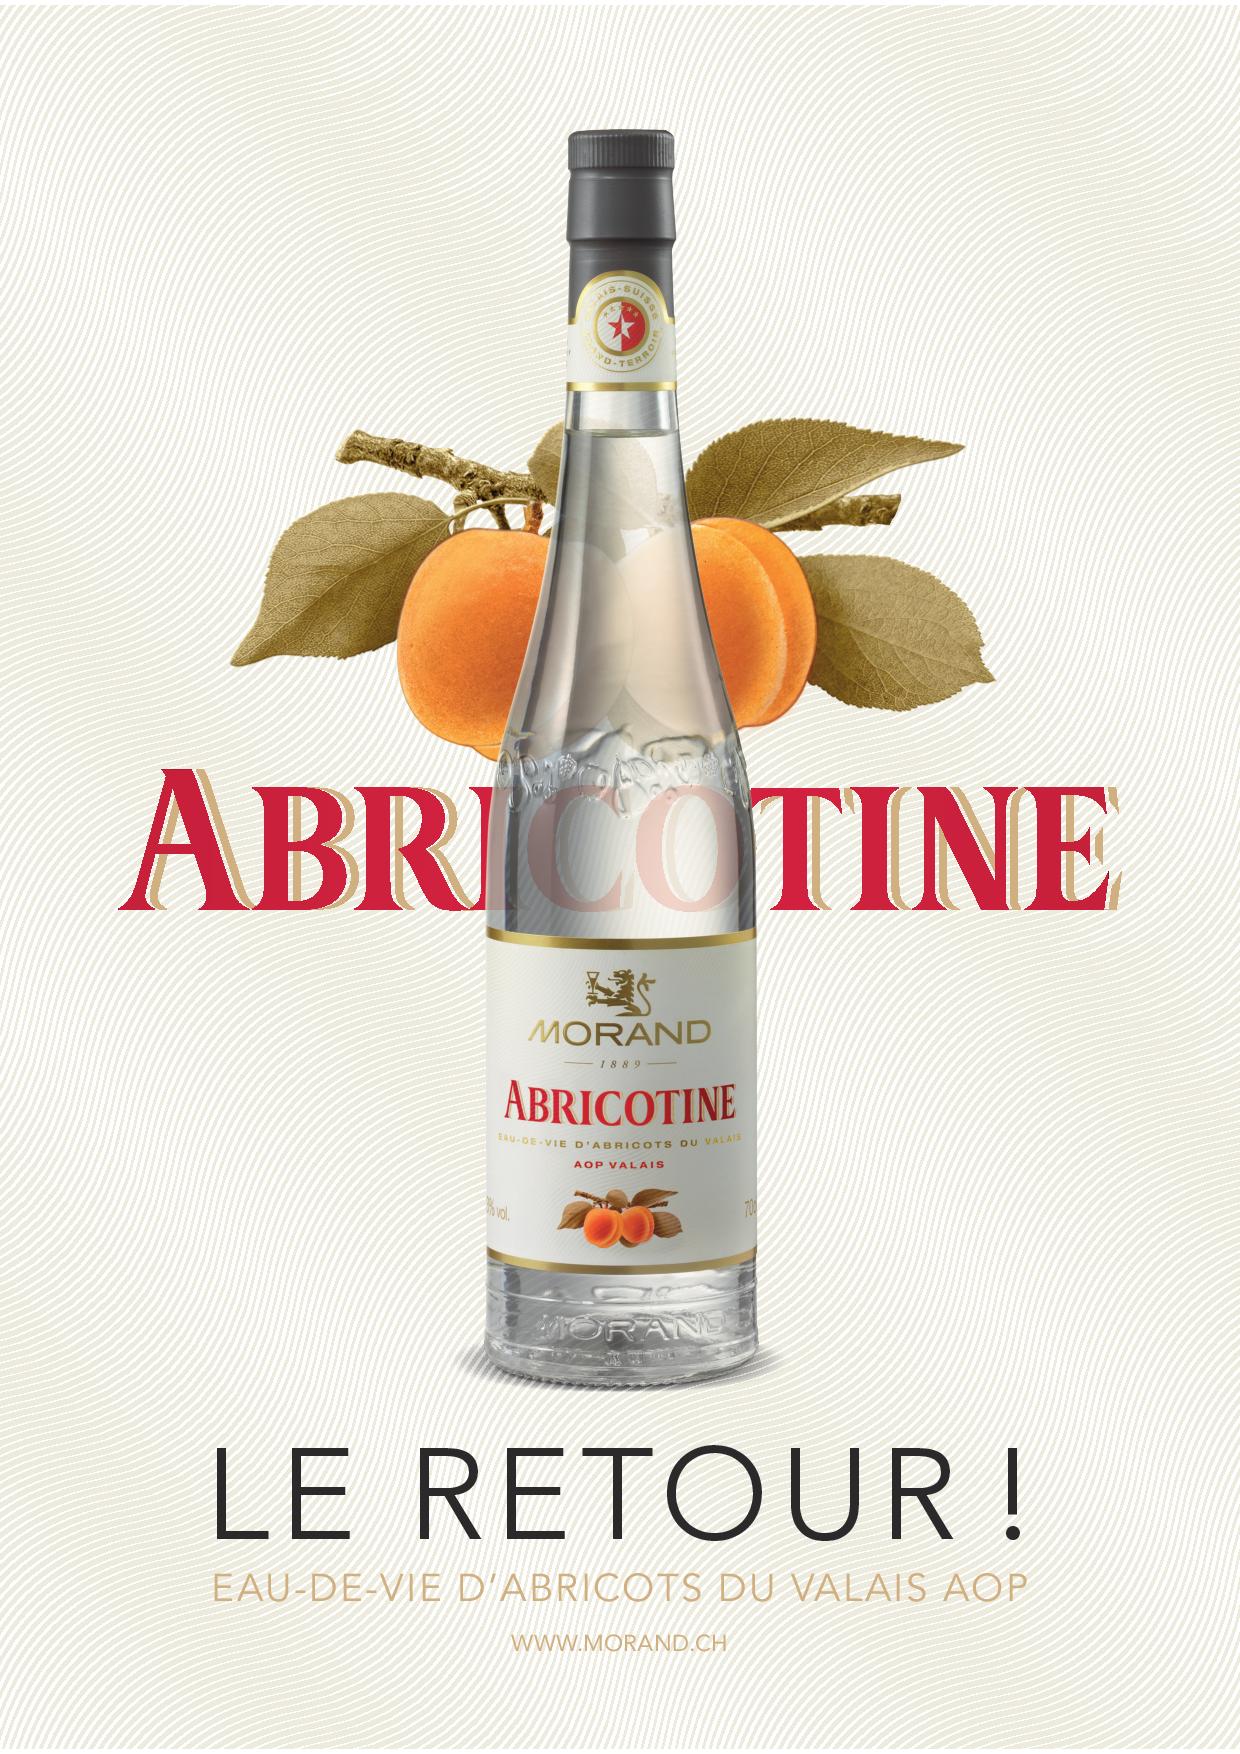 abricotine posters